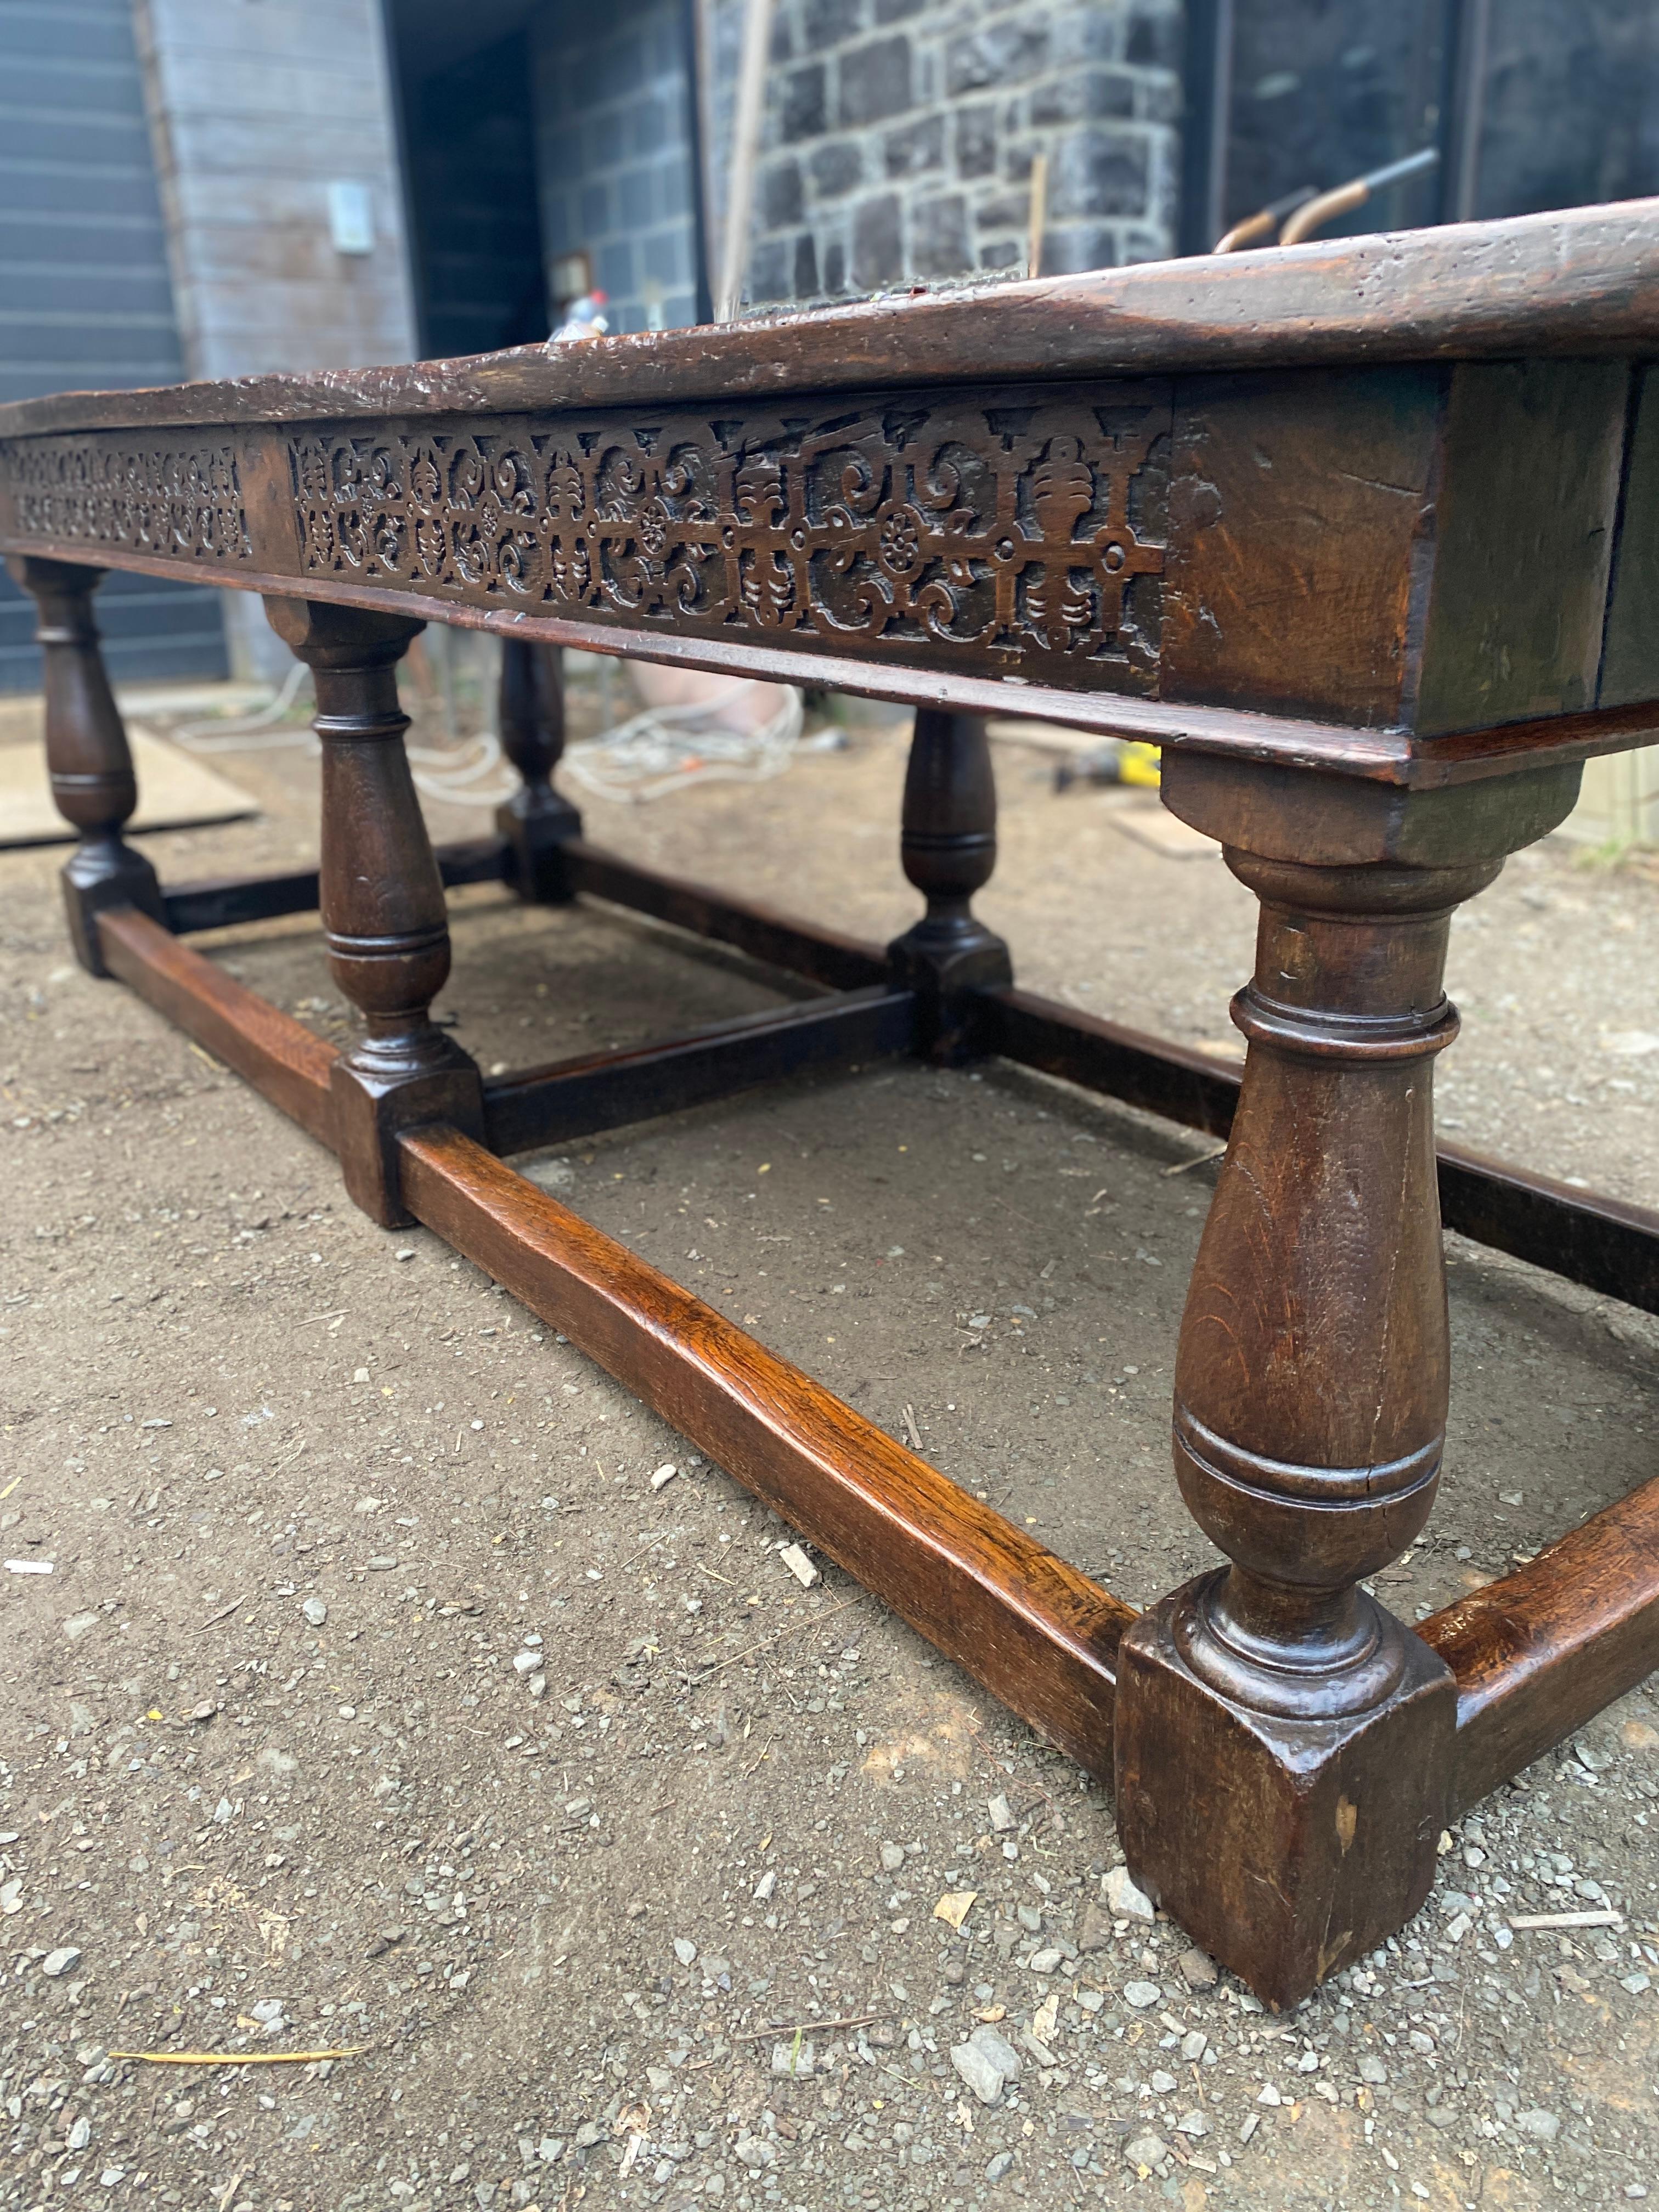 Hand-Crafted 19th Century English Renaissance Console Table with 6 Large Legs